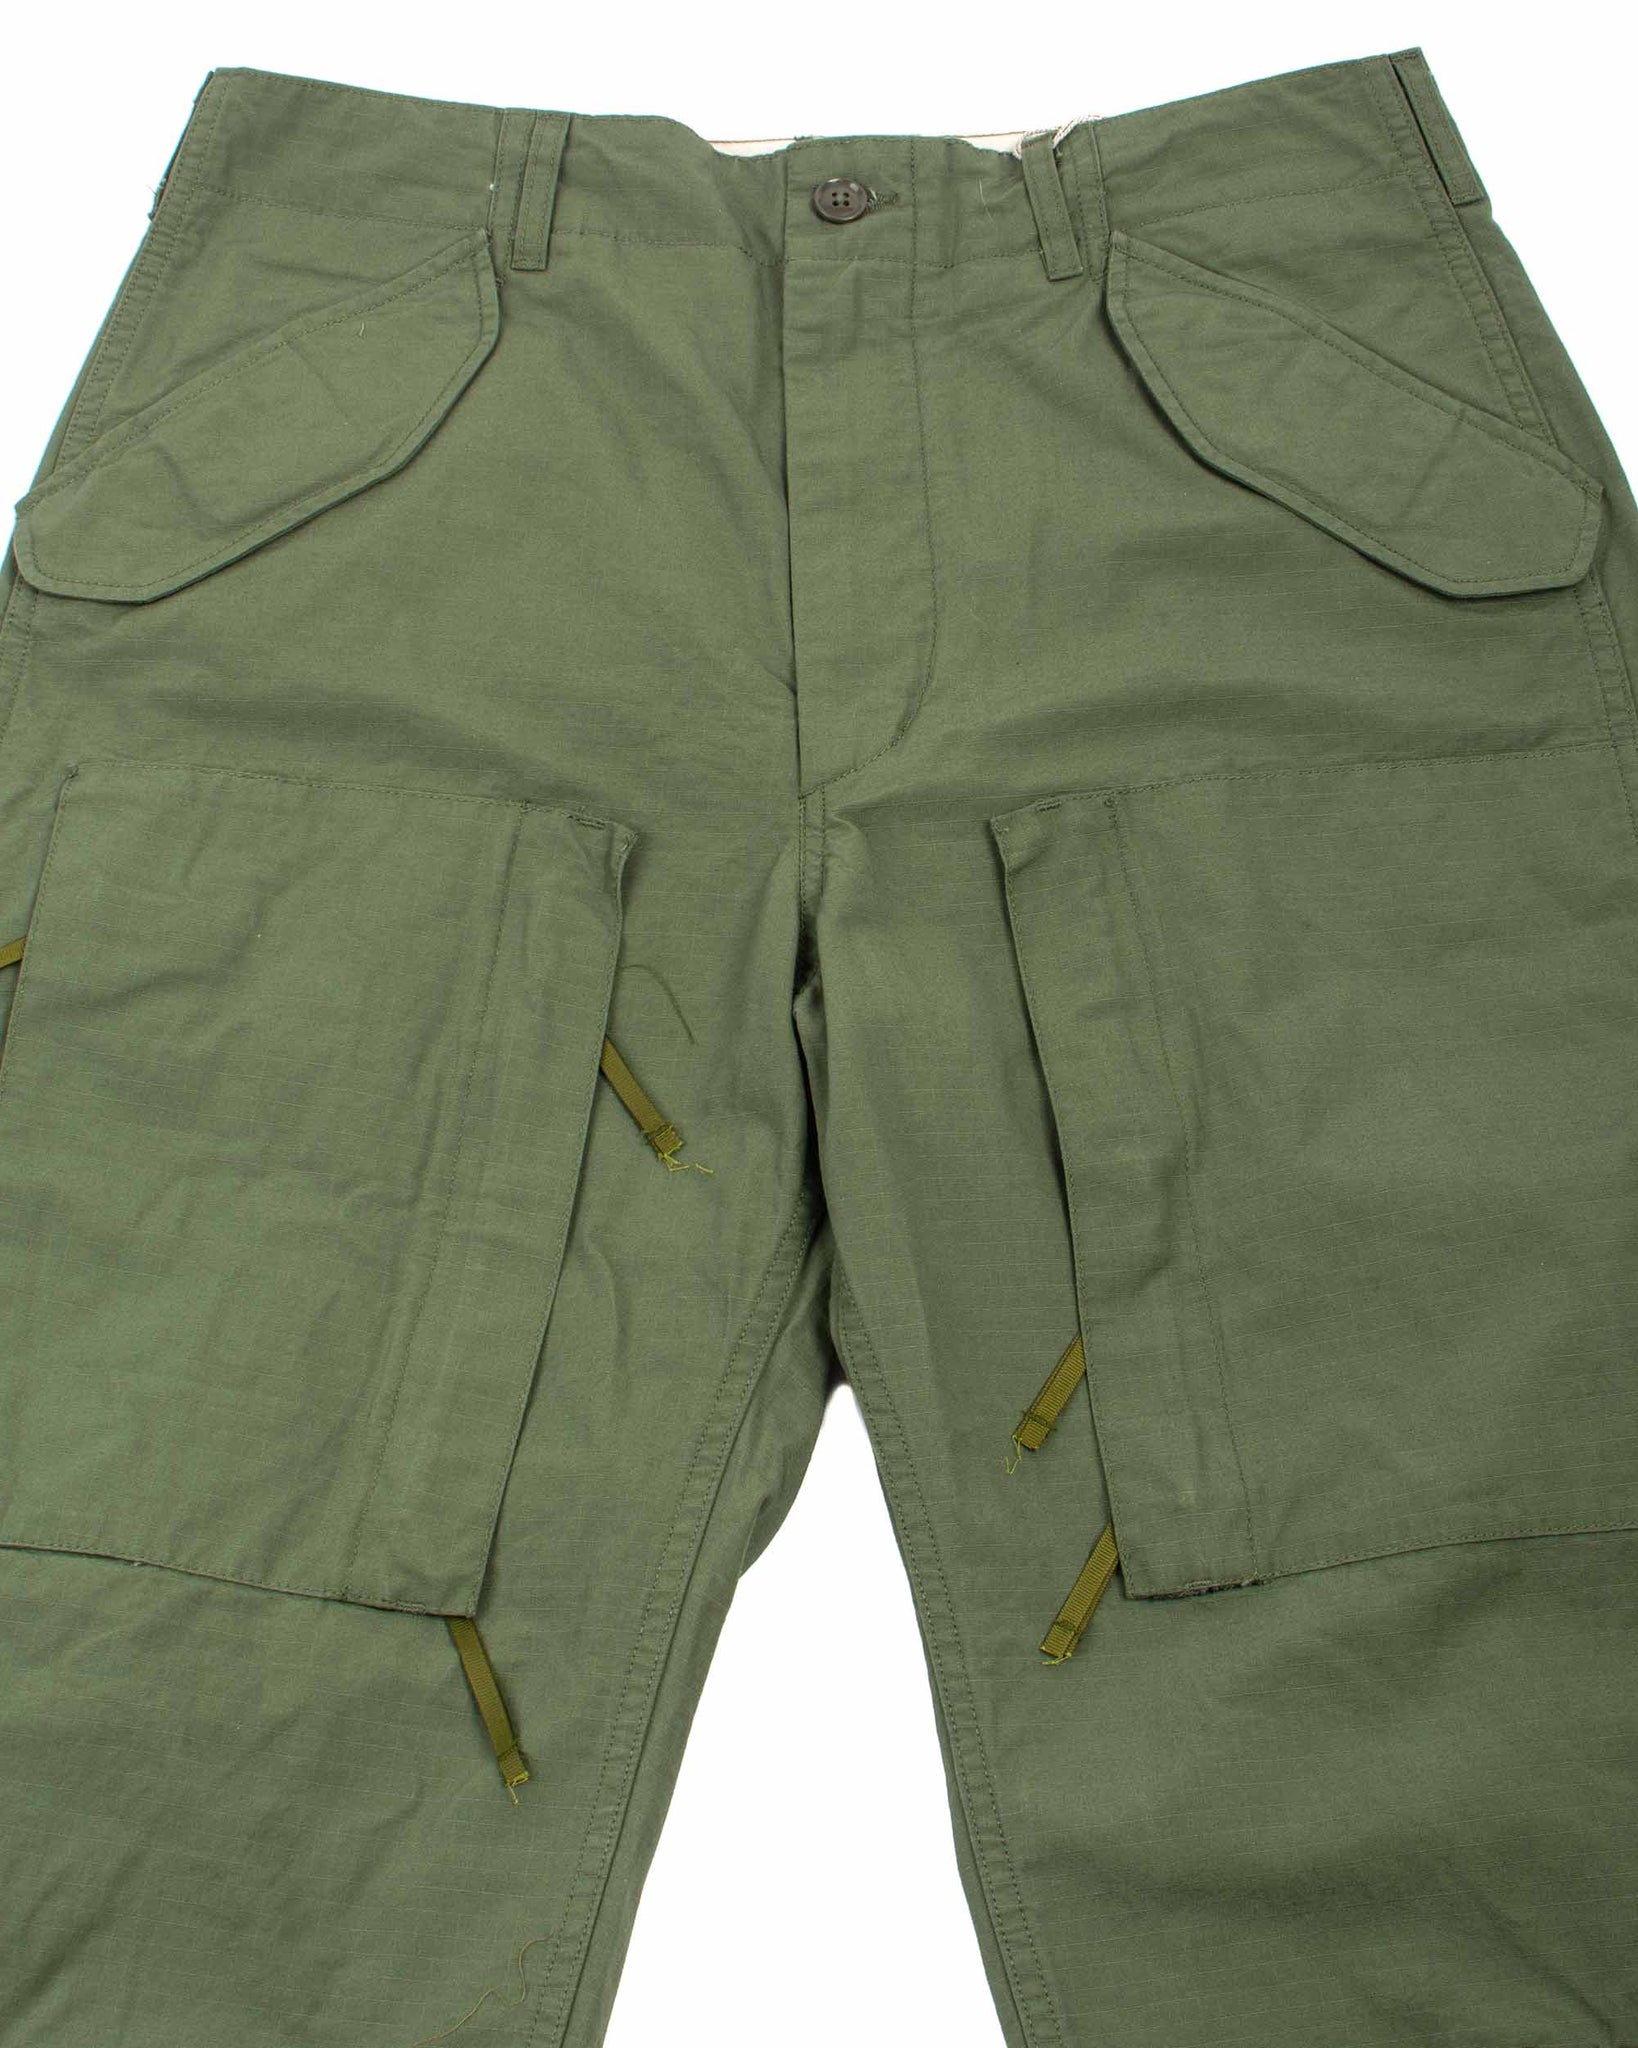 Engineered Garments Aircrew Pant Olive Cotton Ripstop Detail